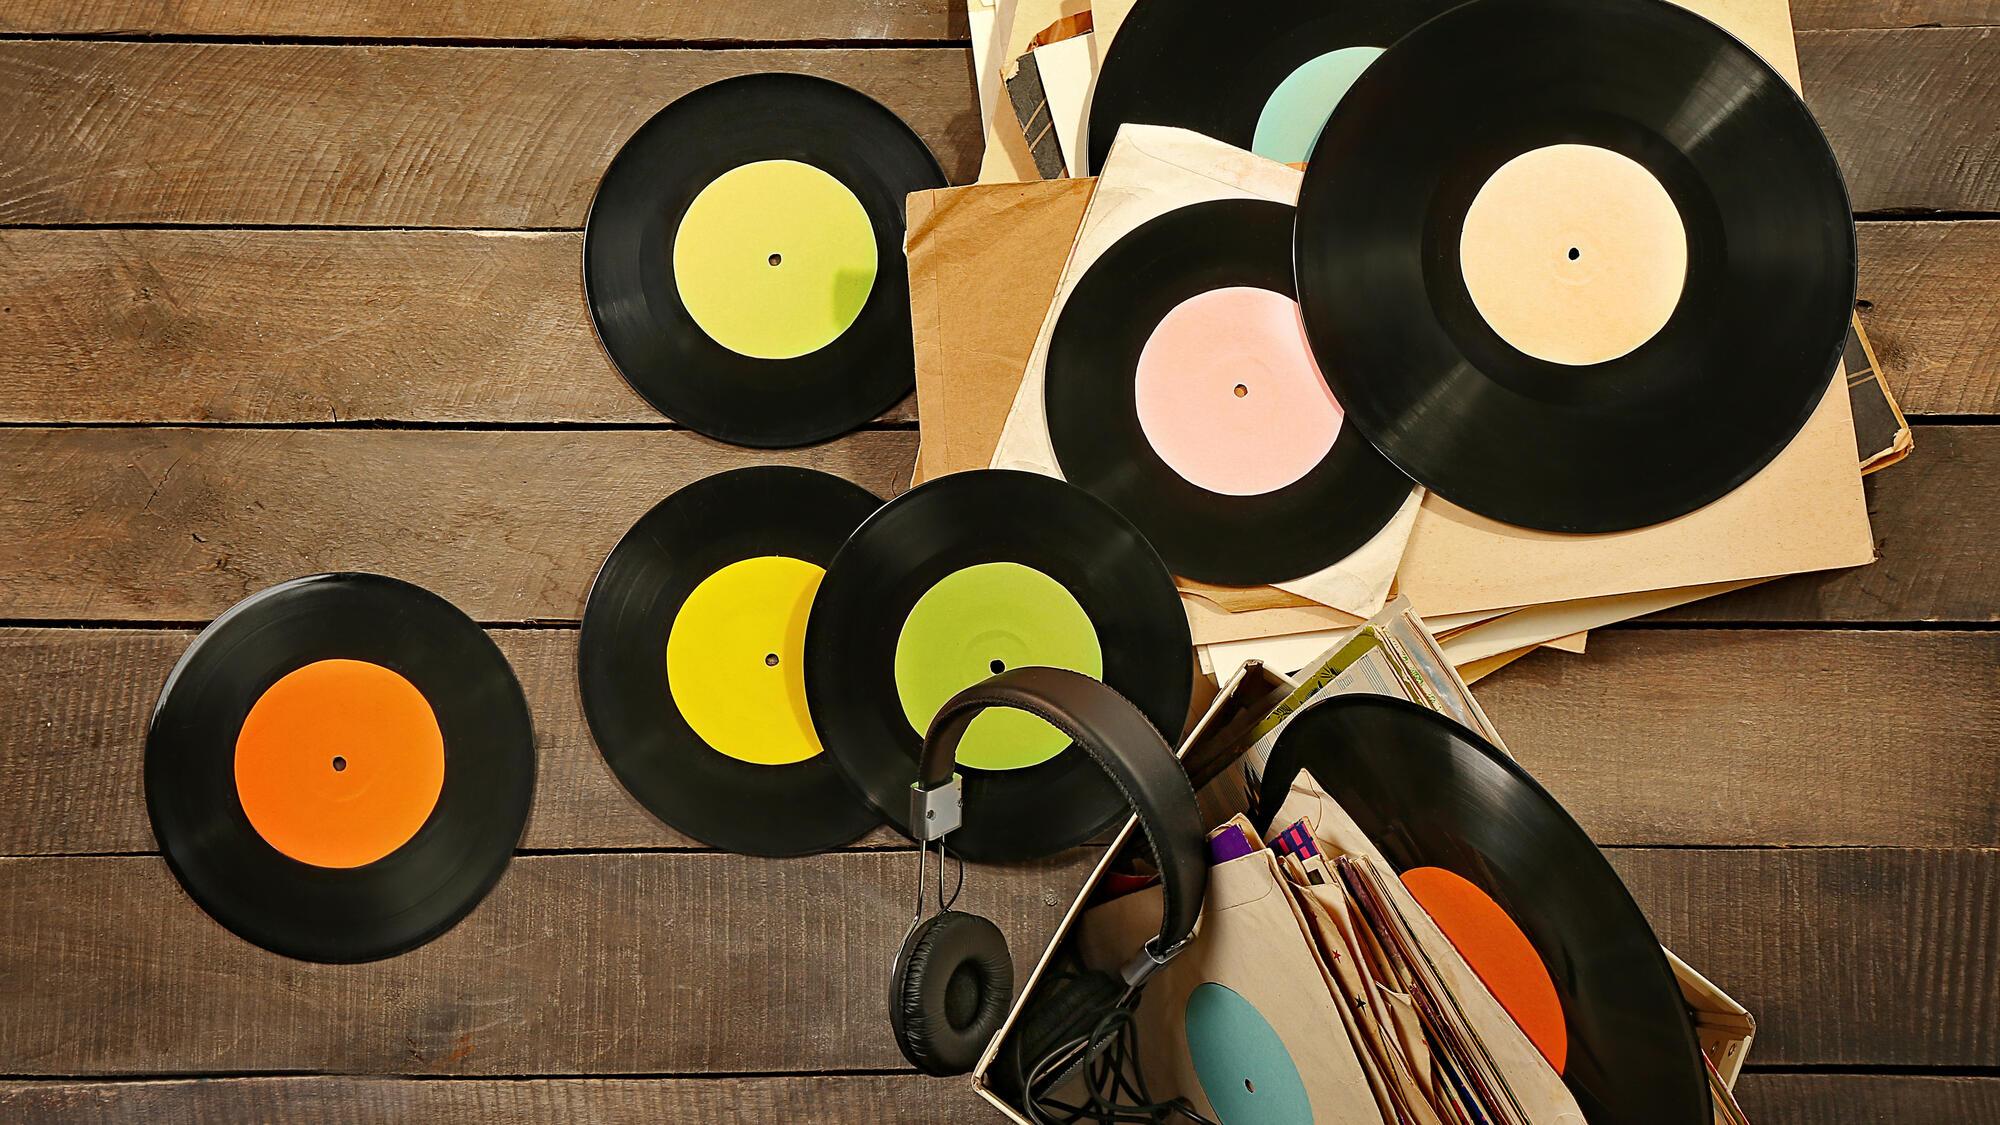 Scattered records and a box of records with a headset, on a wooden floor from a birdseye view